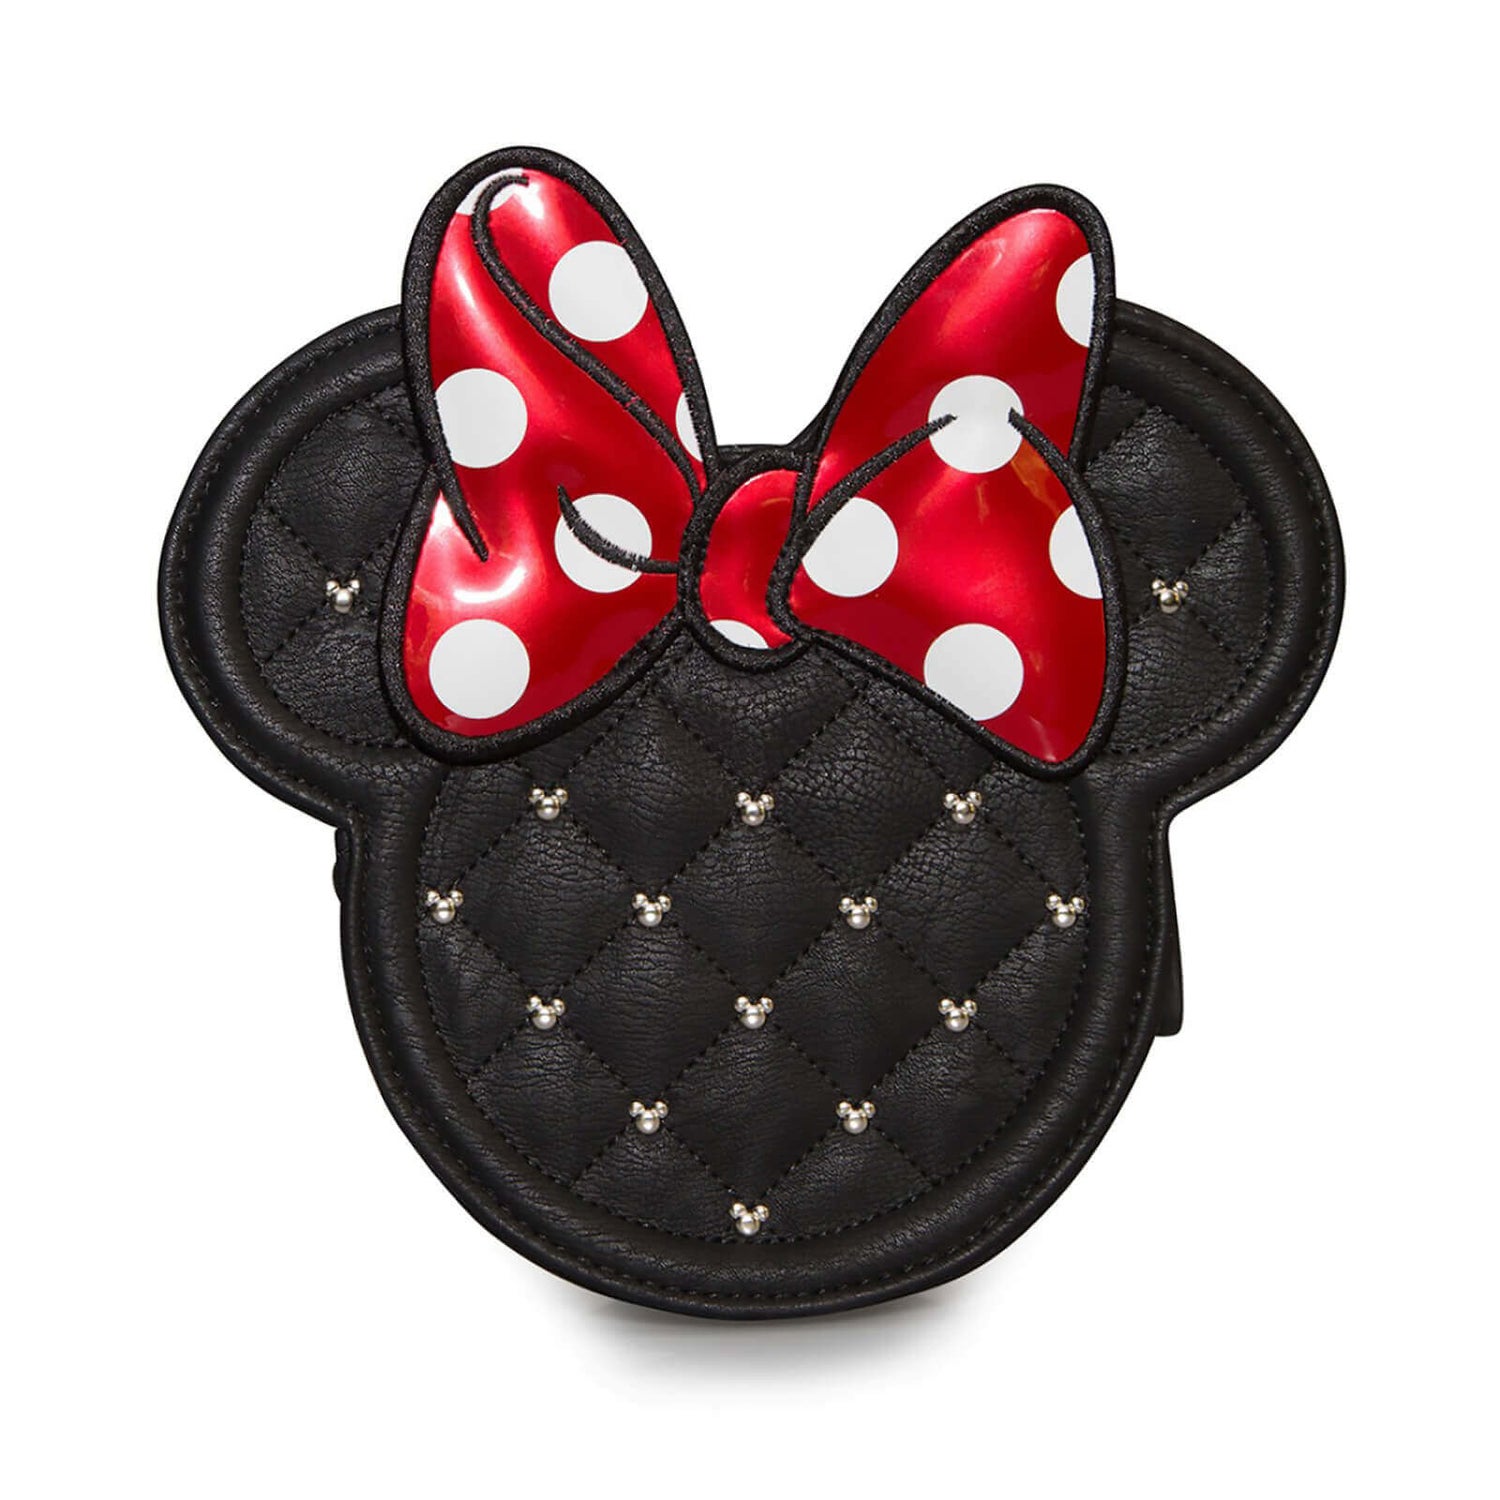 New Minnie Mouse Loungefly Bags Rock The Dots -